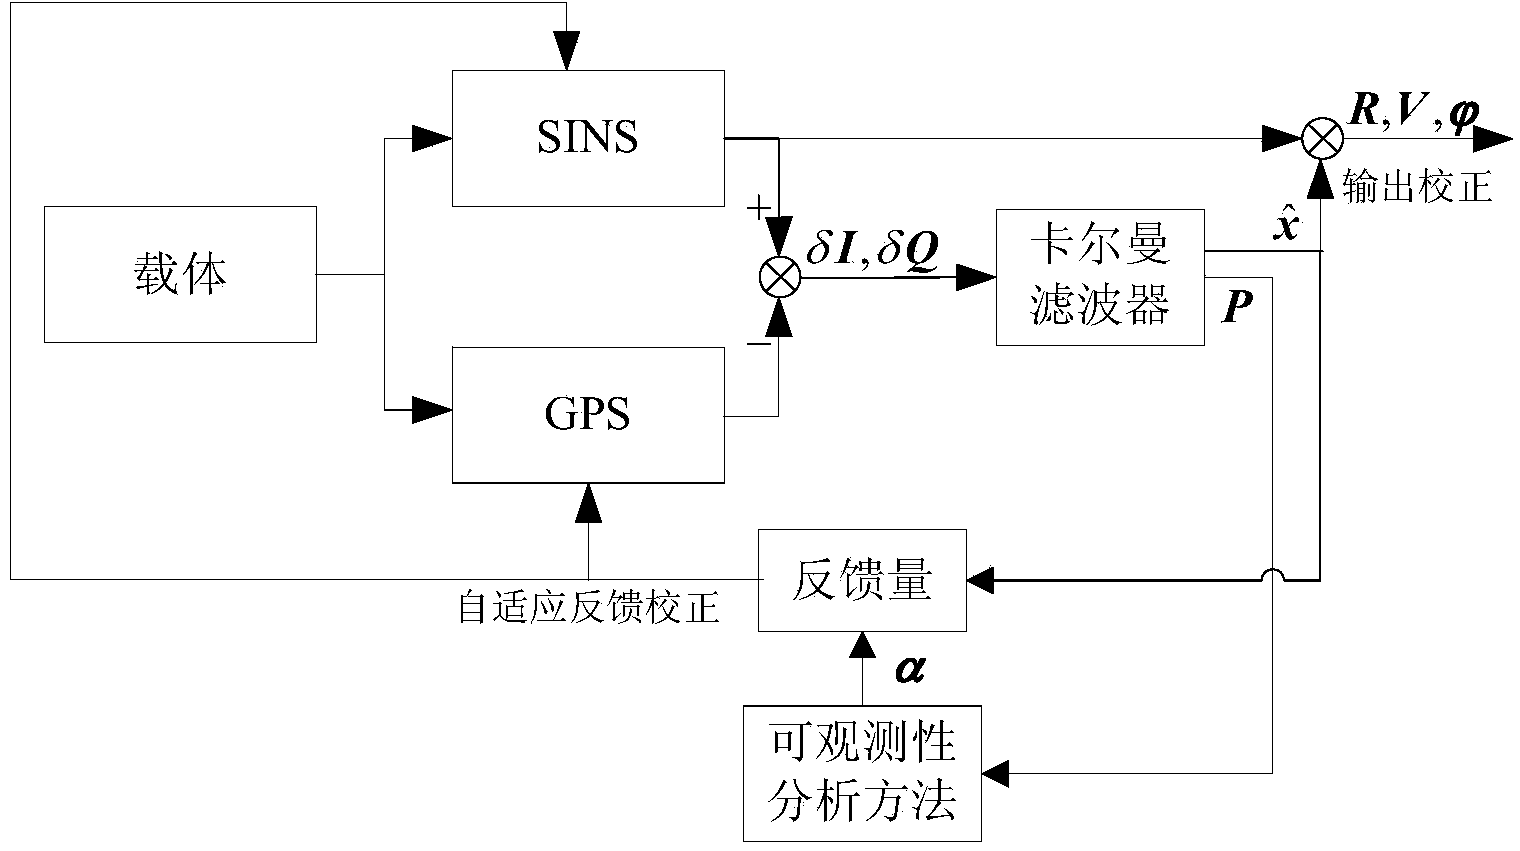 Self-adaption mixed filtering method of GPS/SINS (Global Positioning System/Strapdown Inertial Navigation System) super-compact integrated navigation system